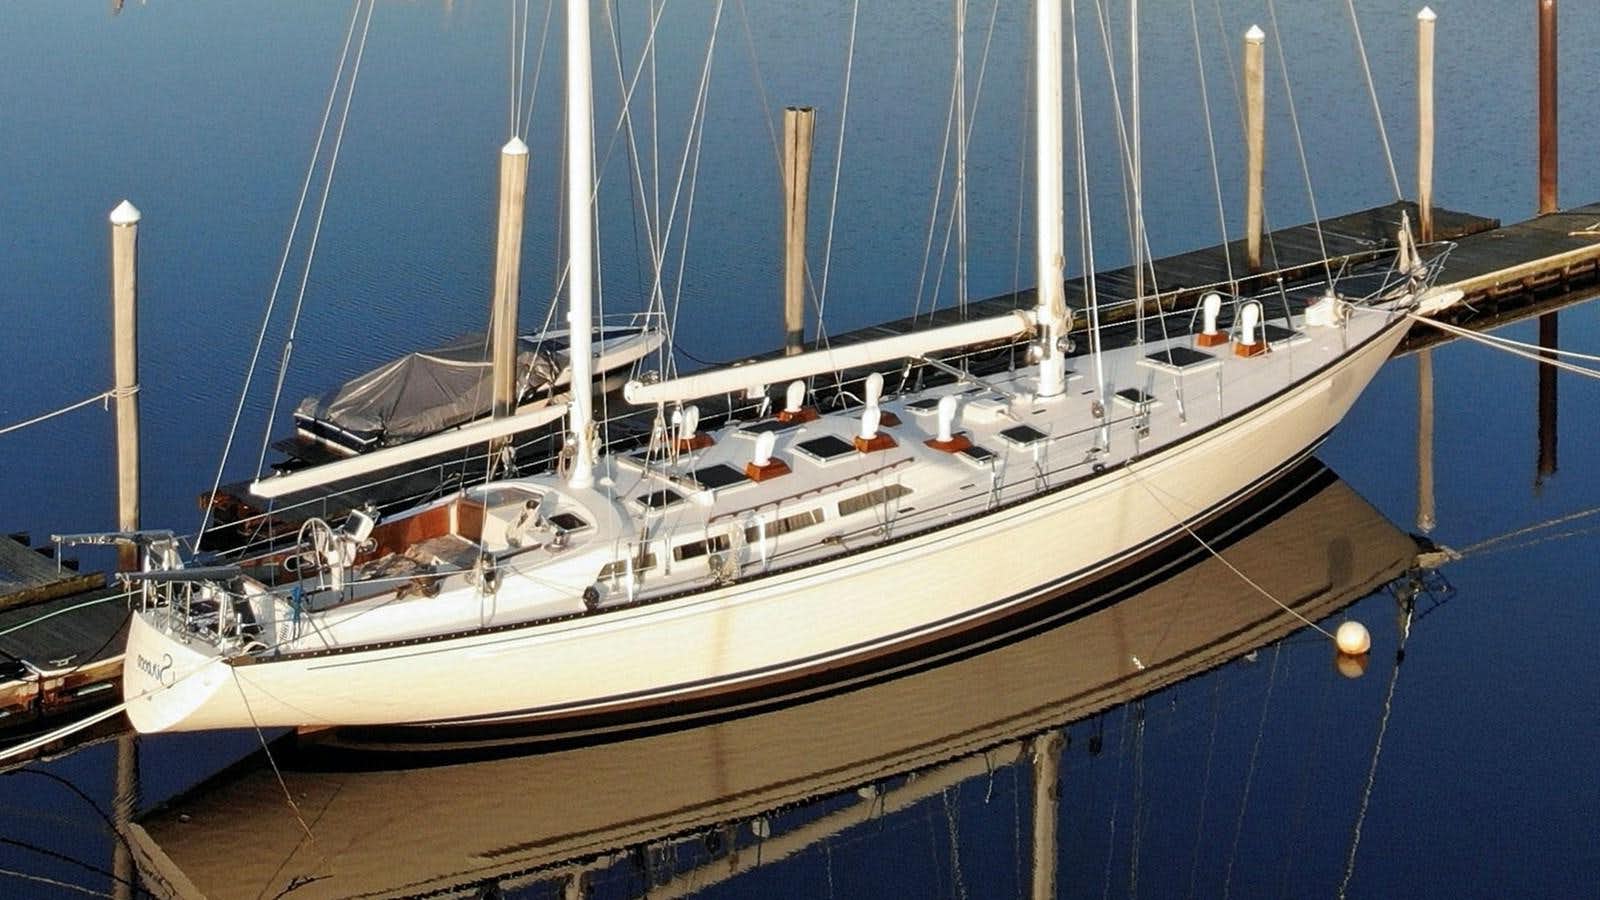 Sirocco
Yacht for Sale